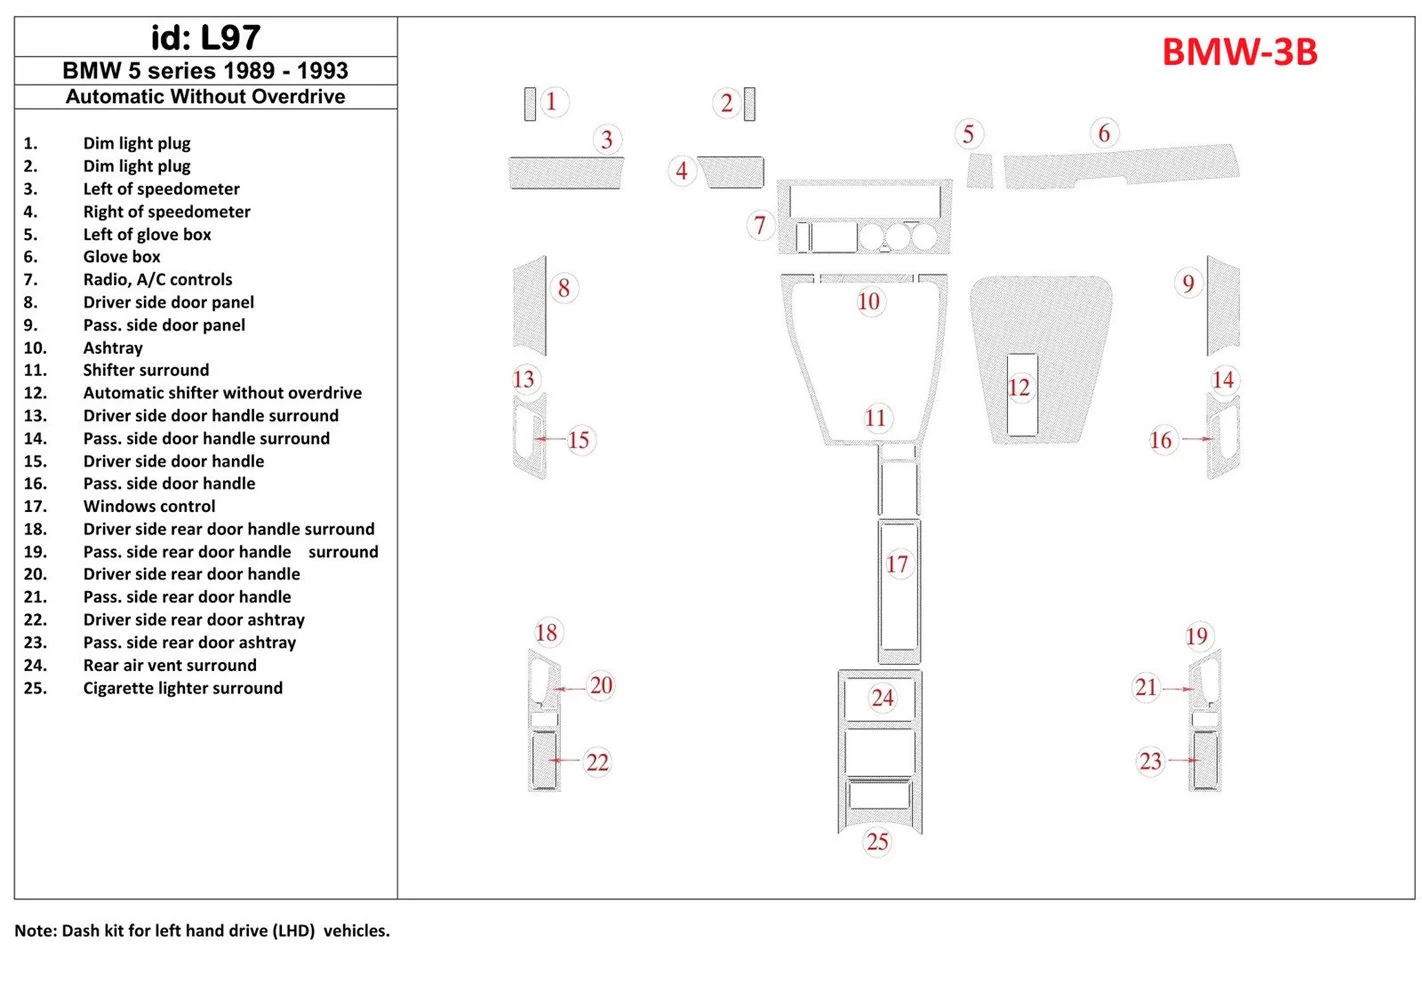 BMW 5 1989-1993 Automatic Gearbox, Without Overdrive, 25 Parts set BD Interieur Dashboard Bekleding Volhouder